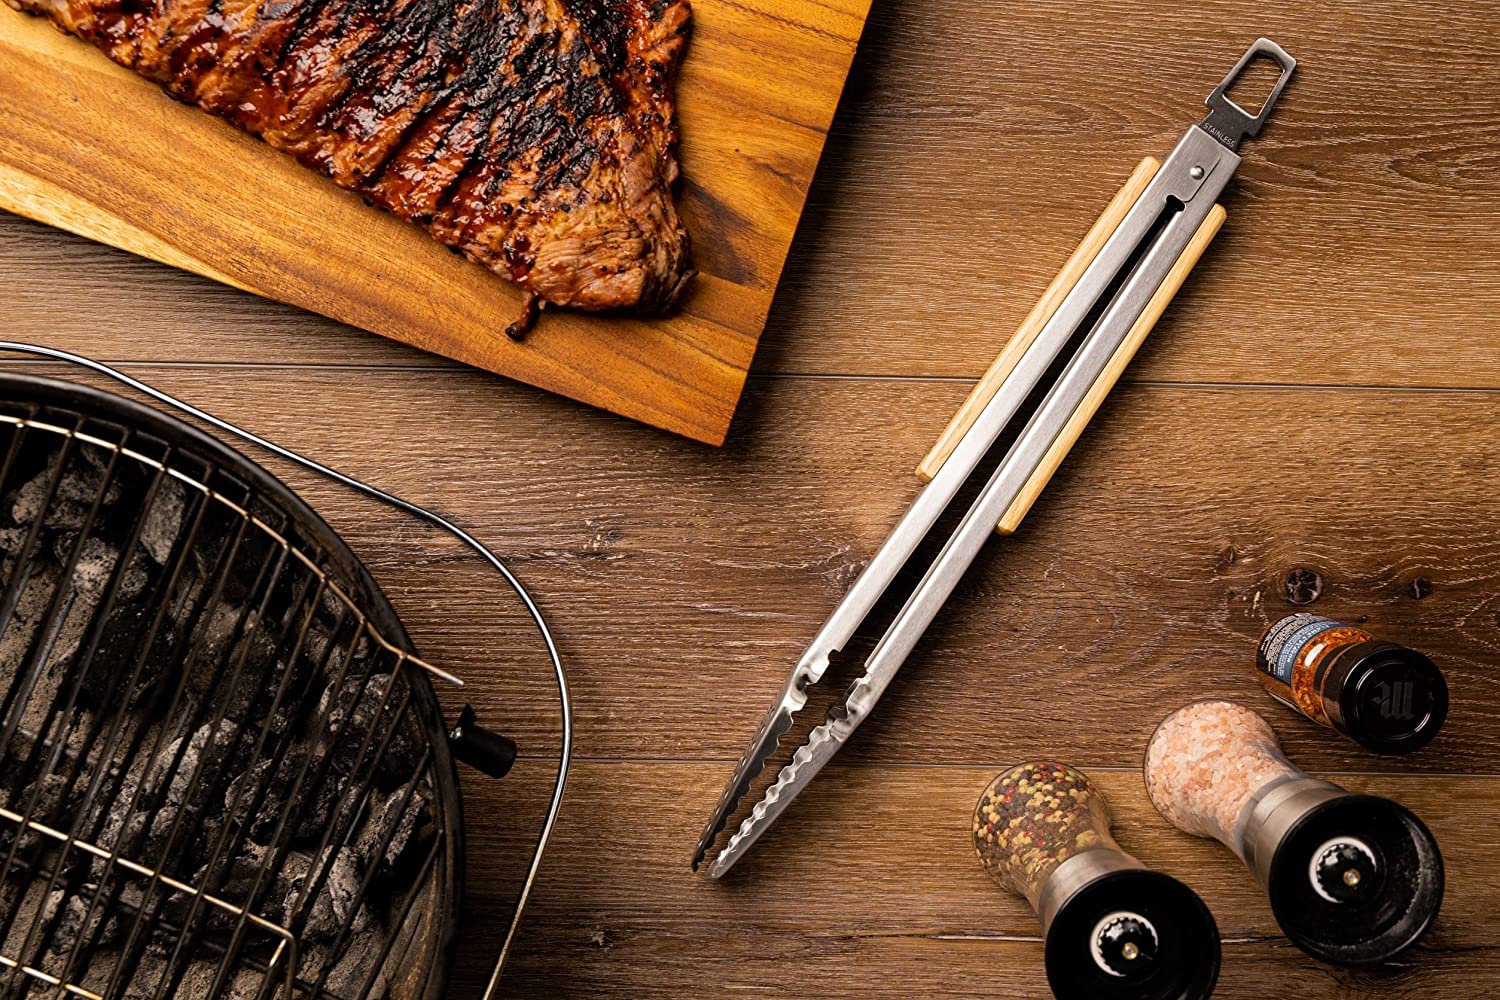 GRILLHOGS 16-Inch Barbecue Tongs Sitting on table next to meat and grill